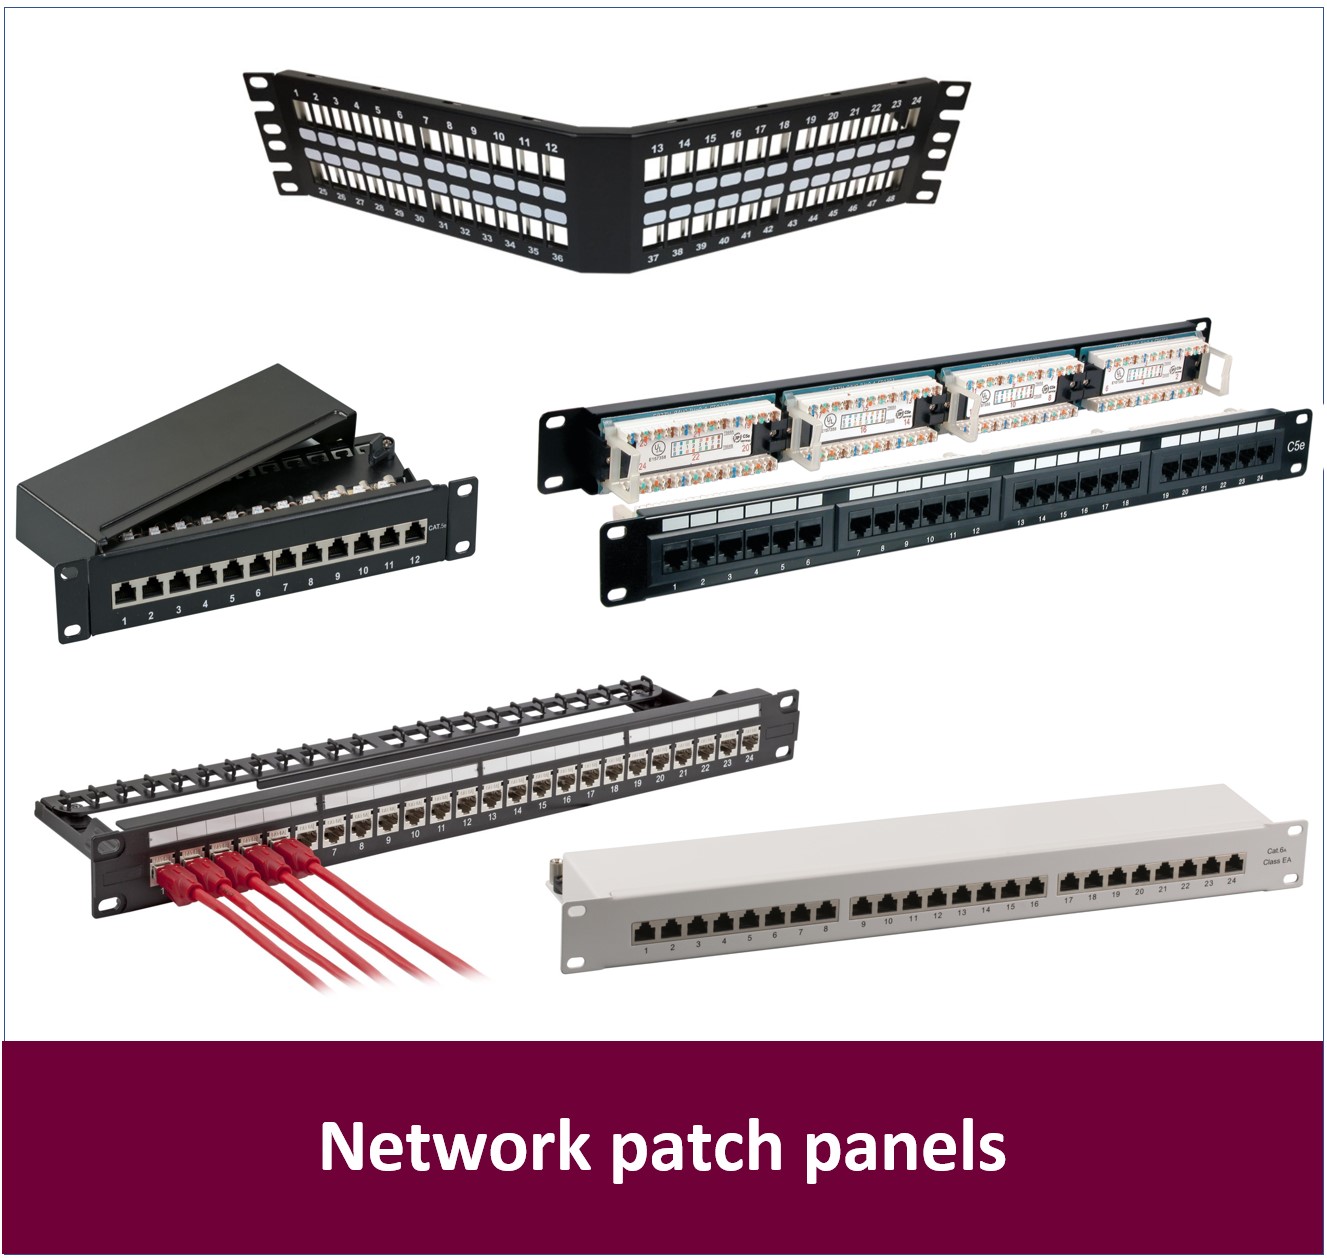 Network patch panels